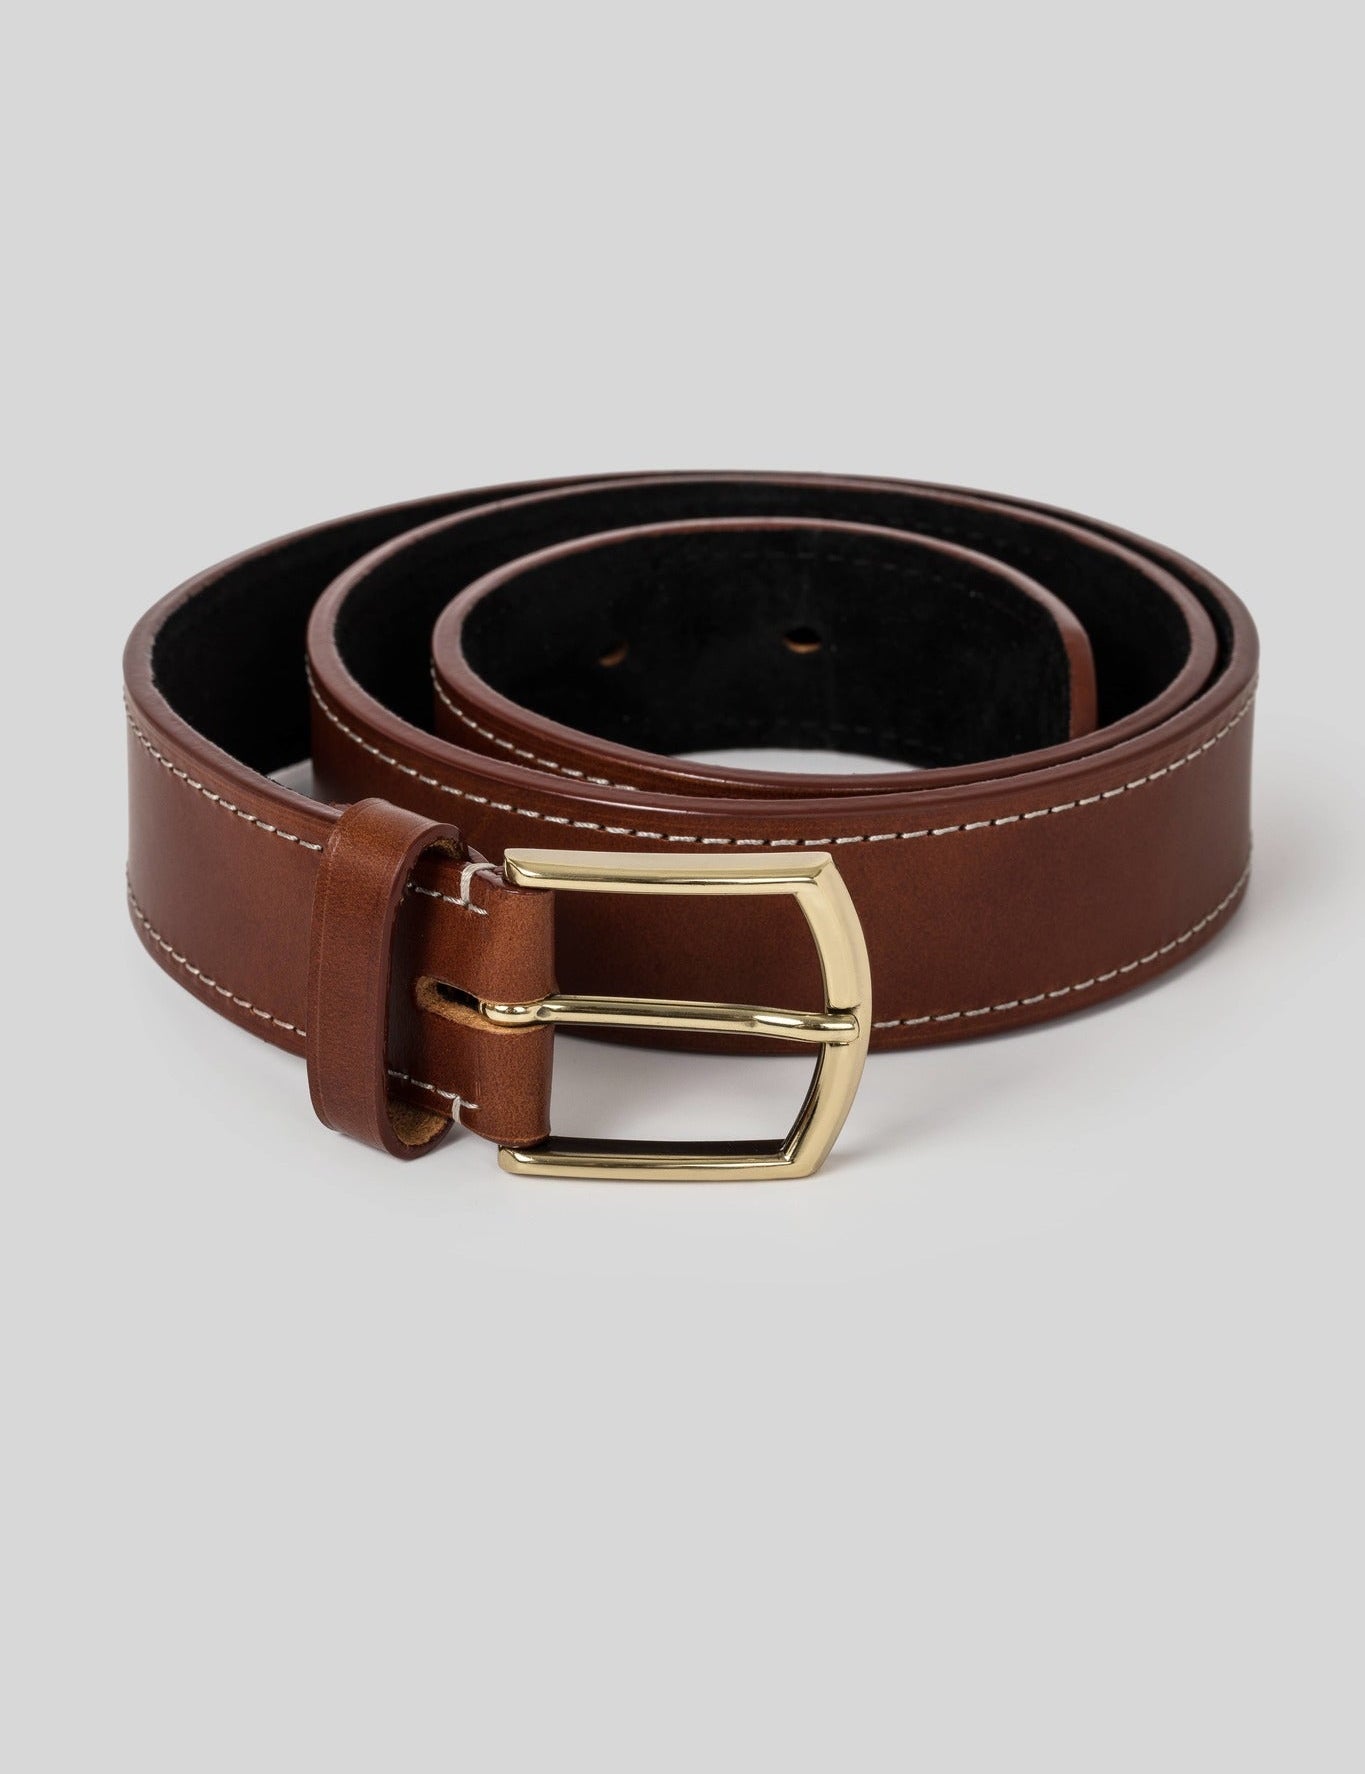 mens-luxury-leather-belt-detailed-front-view_20dfb831-63f5-48e8-ab1b-11c2cac27ba5.jpg